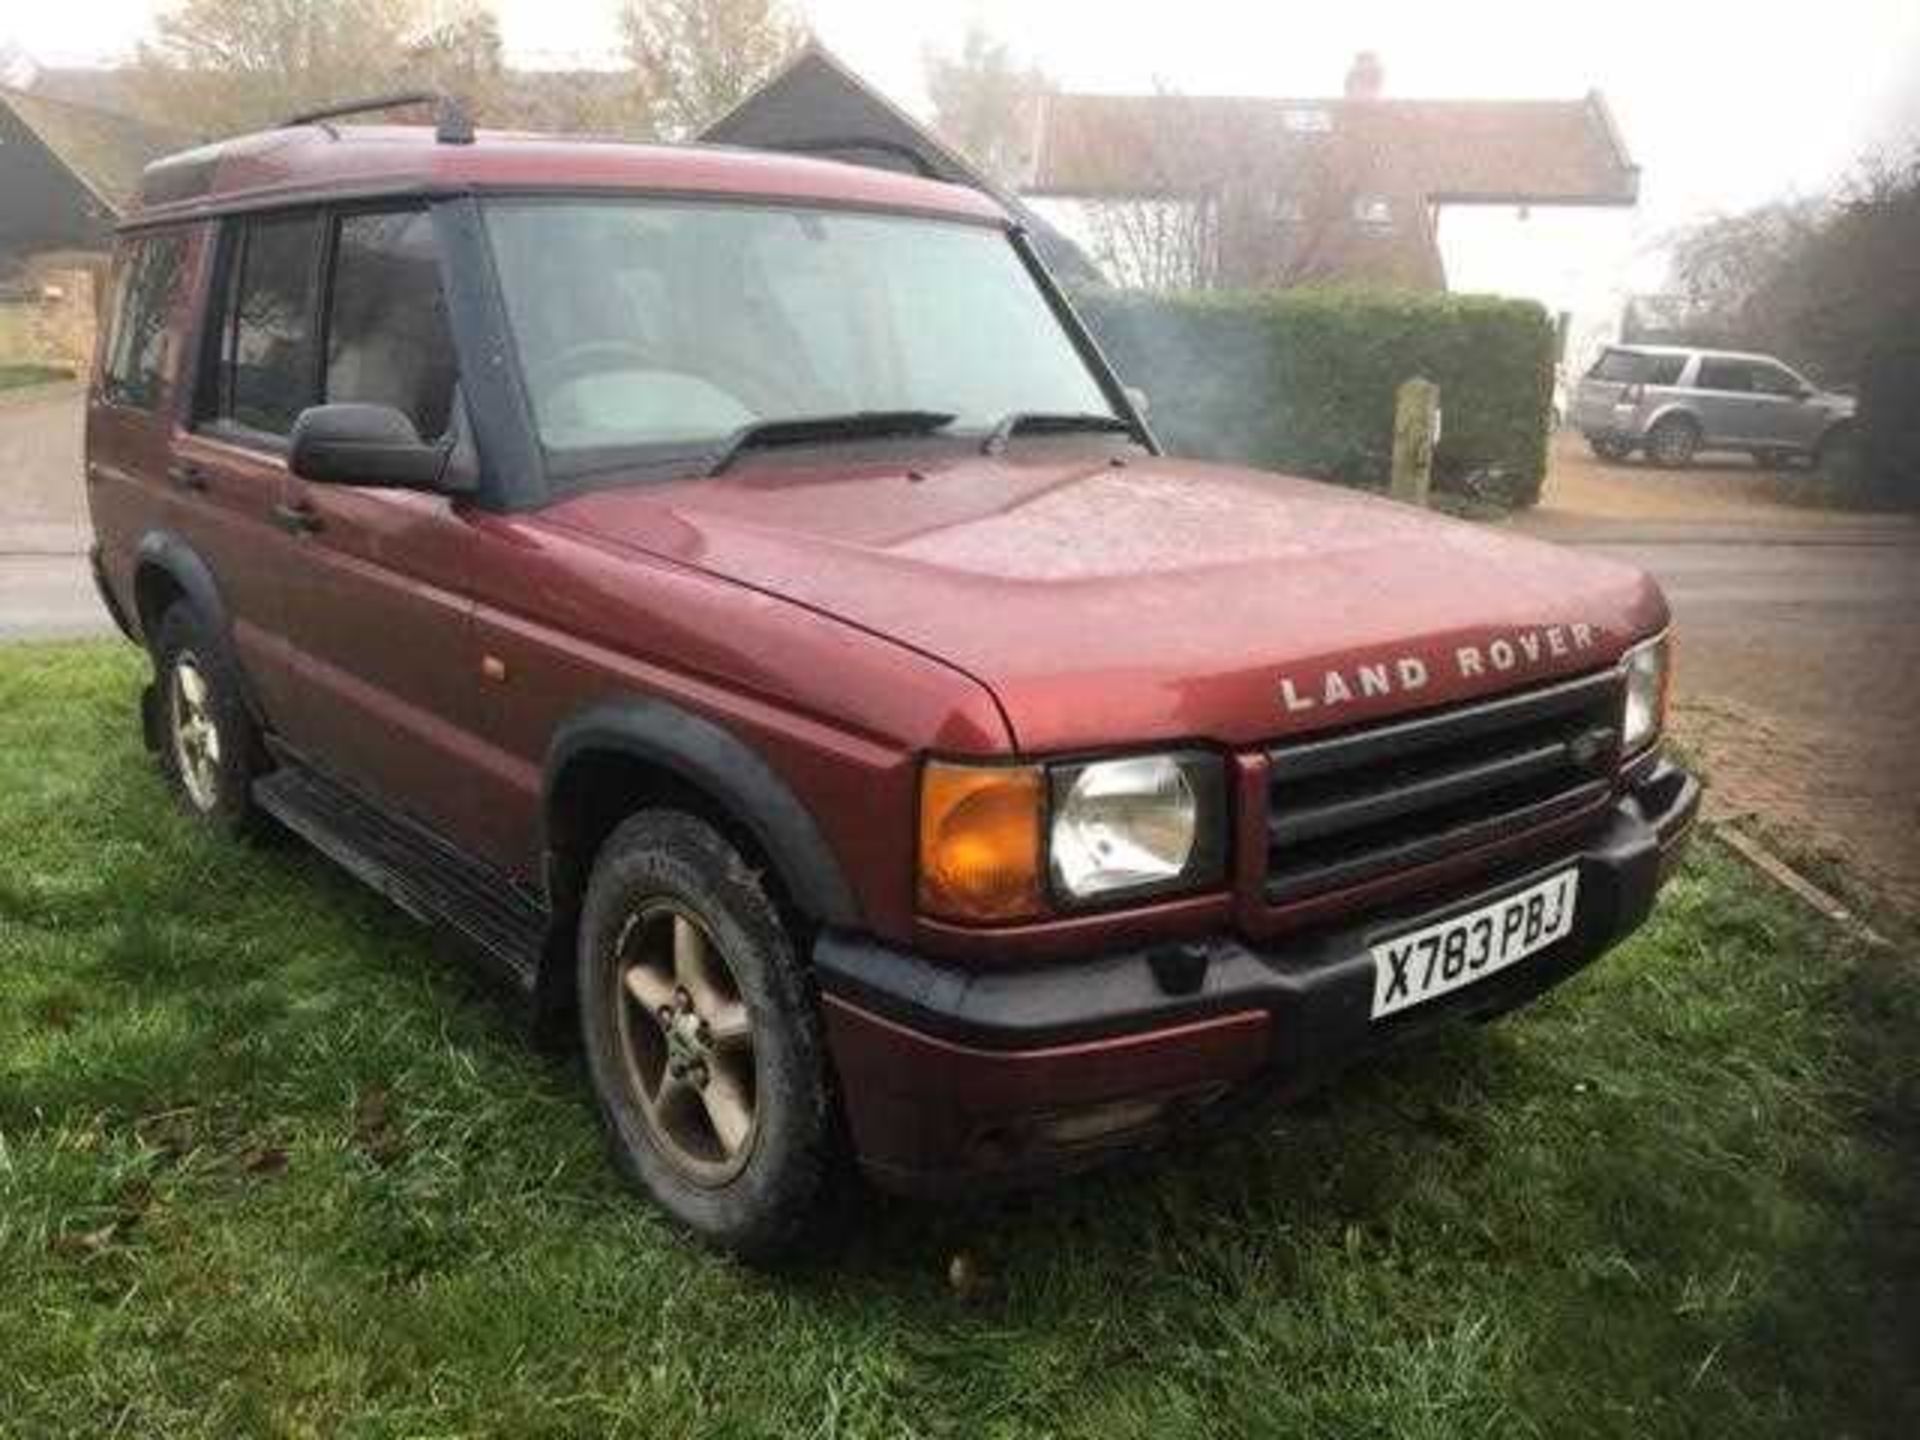 Land Rover Discovery XS, TD5 (Year 2000) Manual, MOT 06/21, Mileage 156k